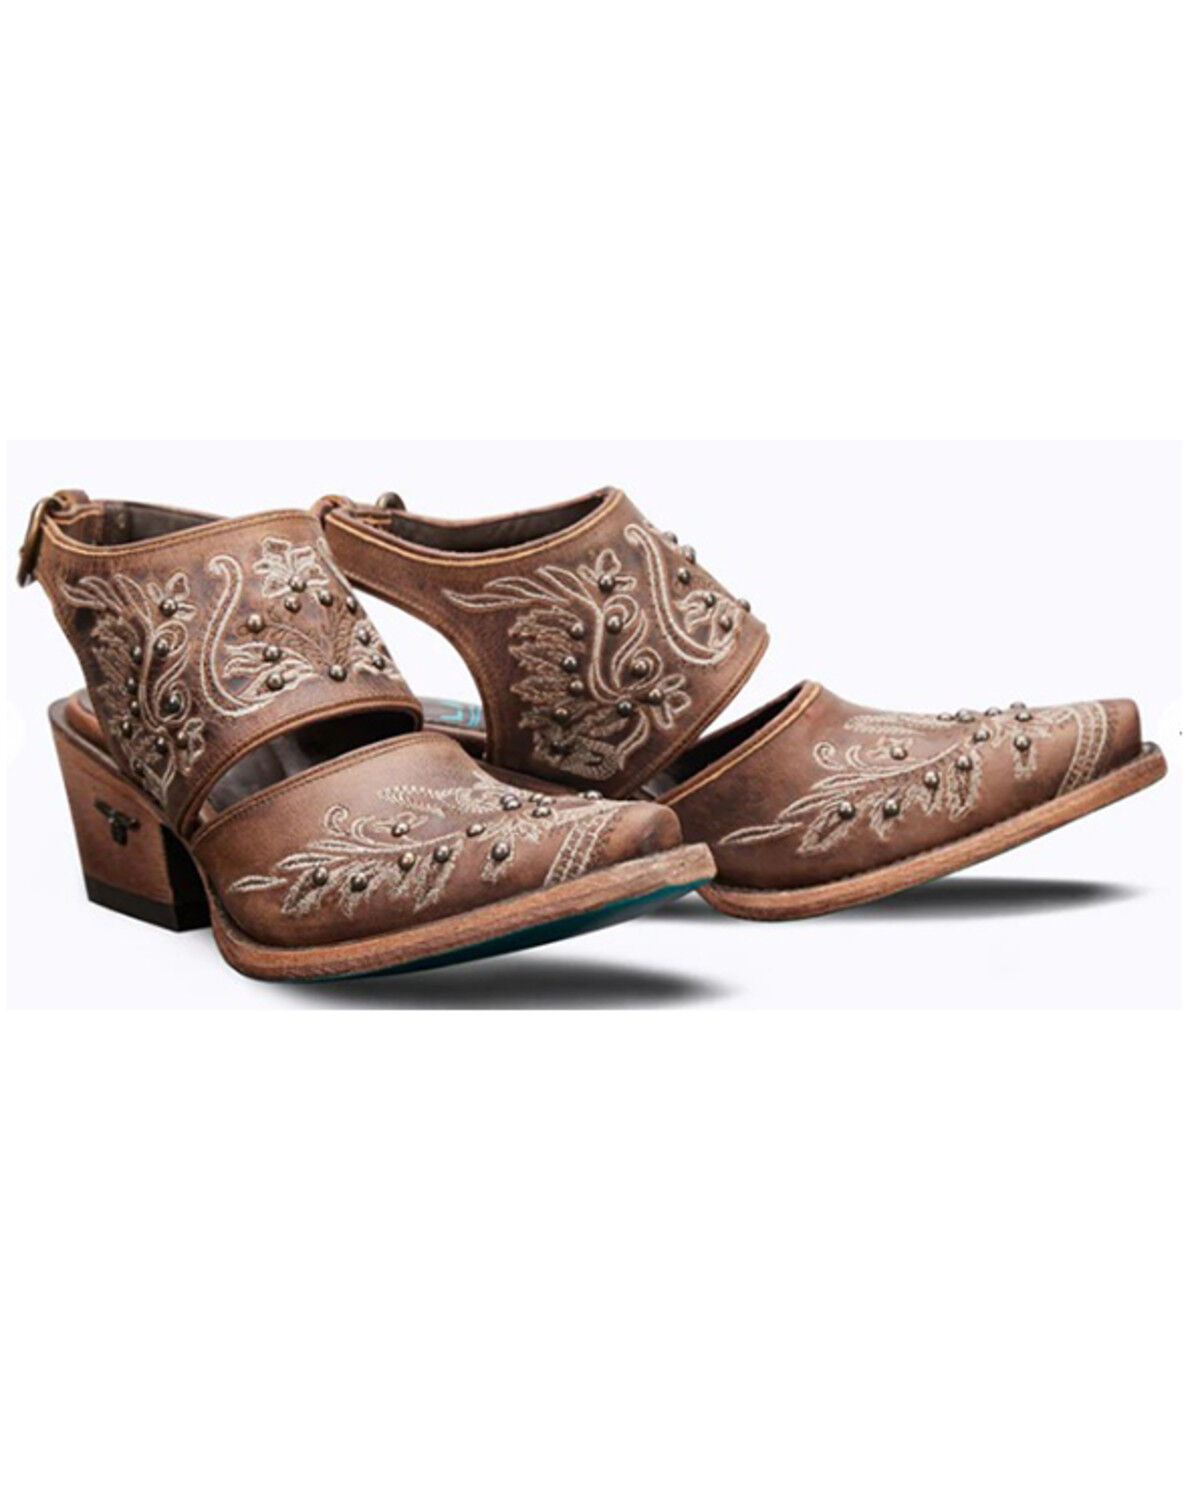 Flower Clogs Mules in Blue Shoes Womens Shoes Boots Cowboy & Western Boots 